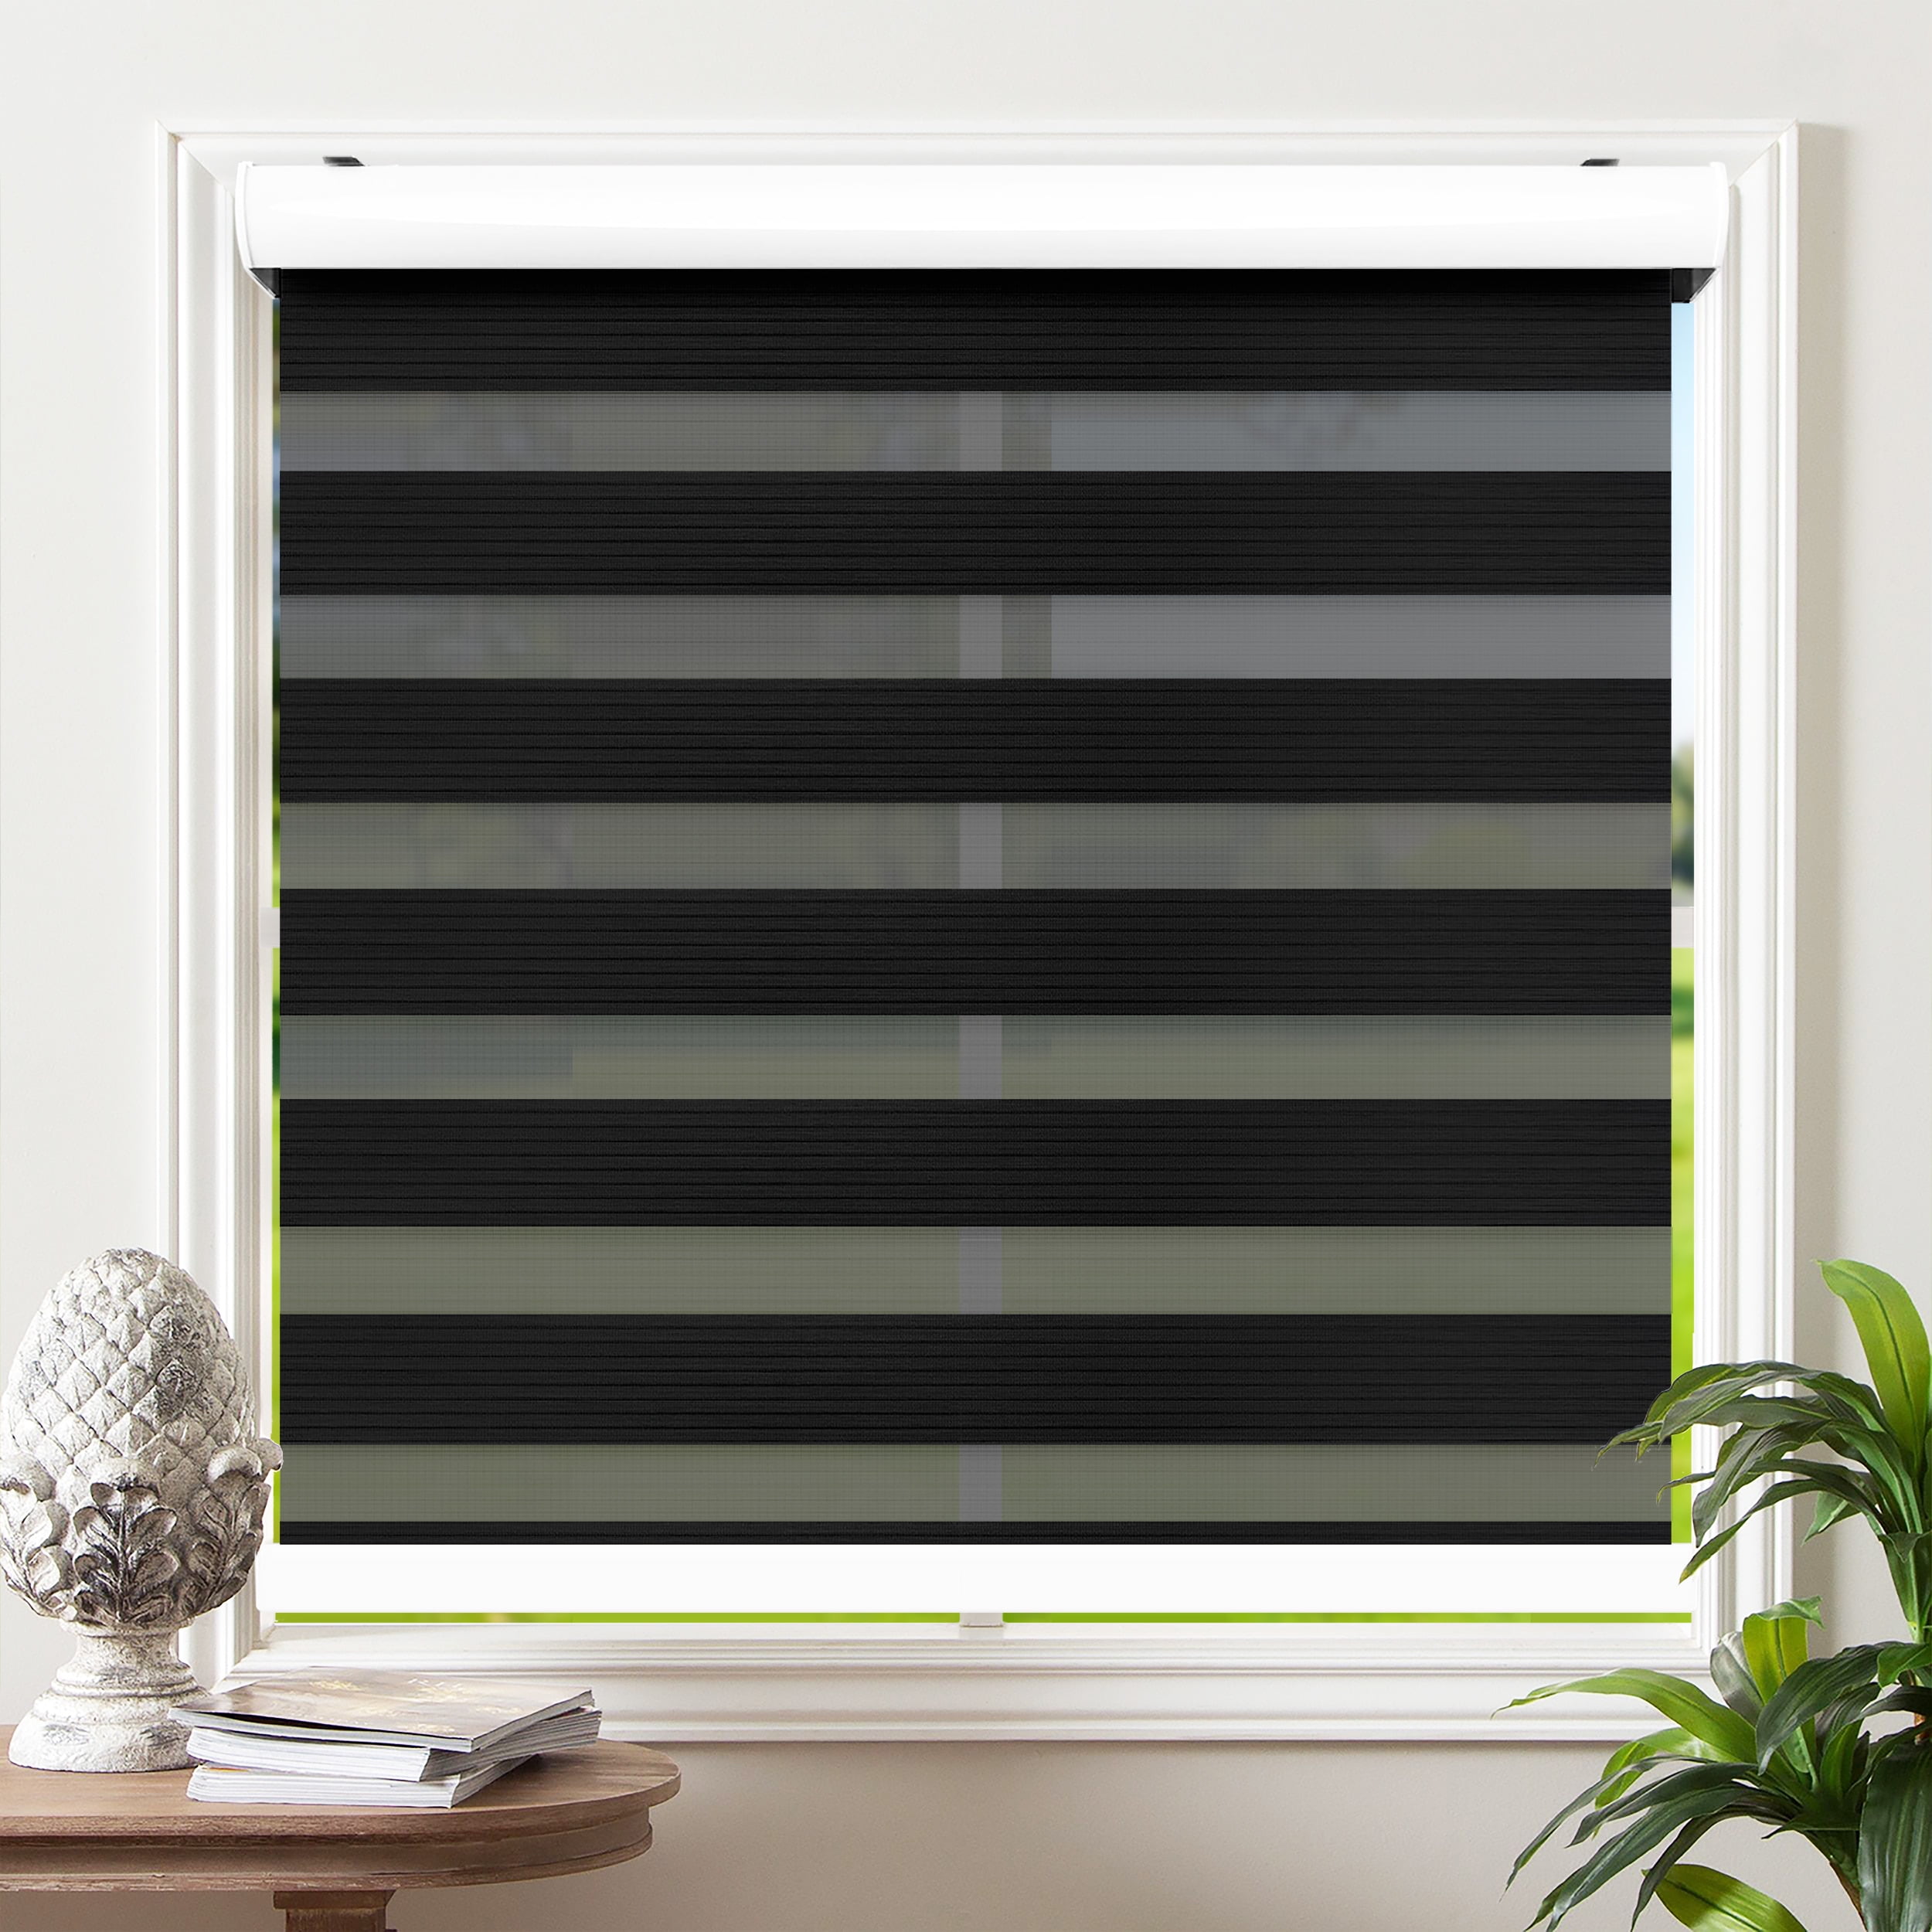 54"x72" Cordless Window Roller Shades Free-Stop Dual Layer Zebra Blinds 